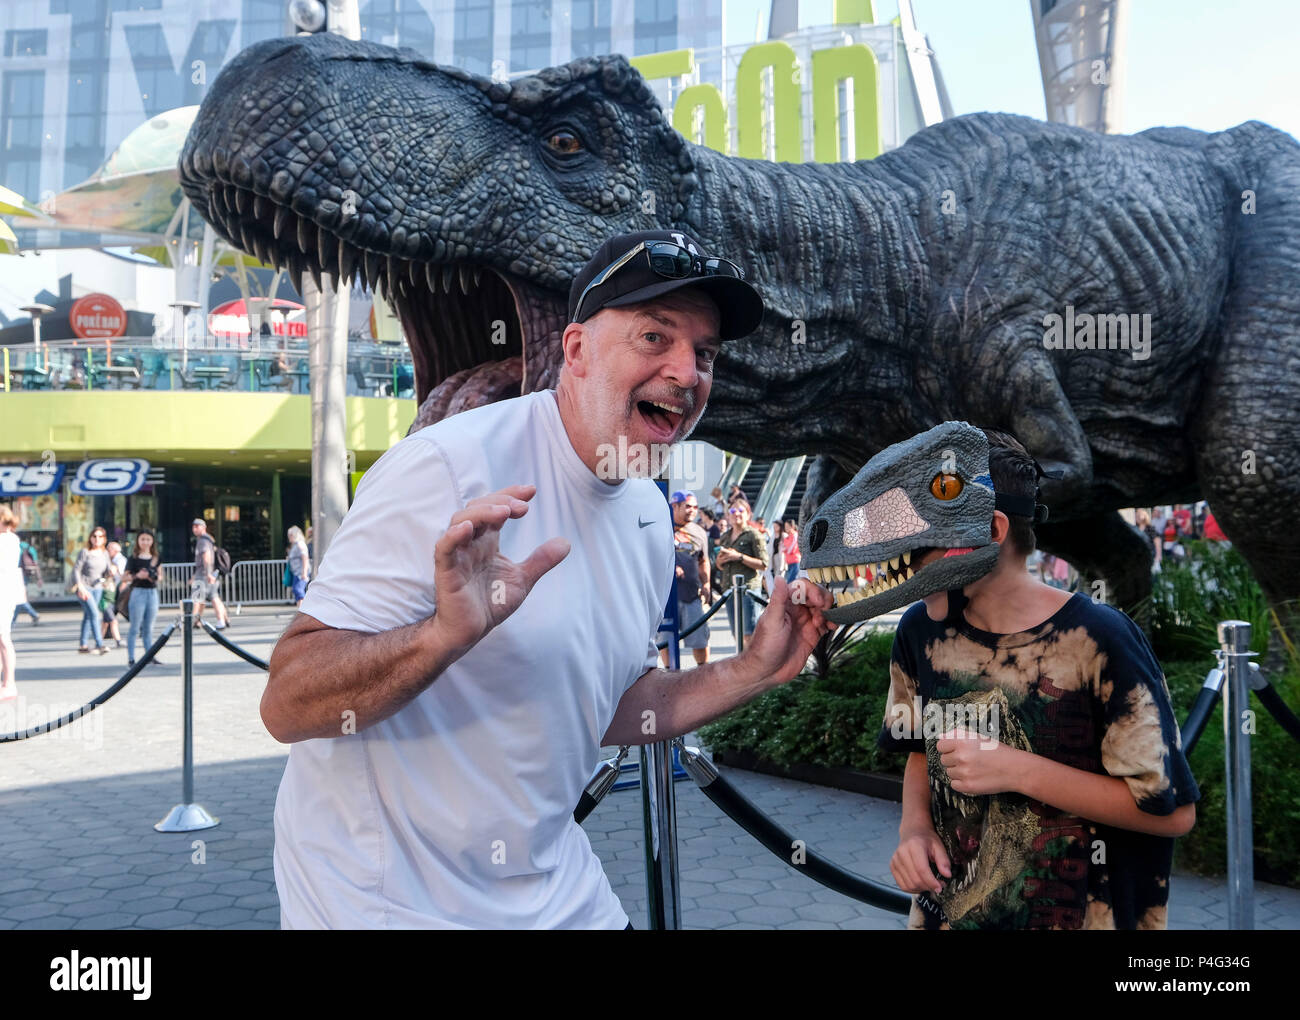 Los Angeles, USA. 21st June, 2018. People pose for pictures with a giant Tyrannosaurus rex statue at Universal CityWalk in Los Angeles, United States on June 21, 2018. For the promotion of the screening of the new film 'Jurassic World: Fallen Kingdom' on Universal Cinema Theatres, a colossal 3-ton Tyrannosaurus rex, a life-sized Gyrosphere original movie prop, as well as original costume, are displayed for public at Universal CityWalk. Credit: Zhao Hanrong/Xinhua/Alamy Live News Stock Photo